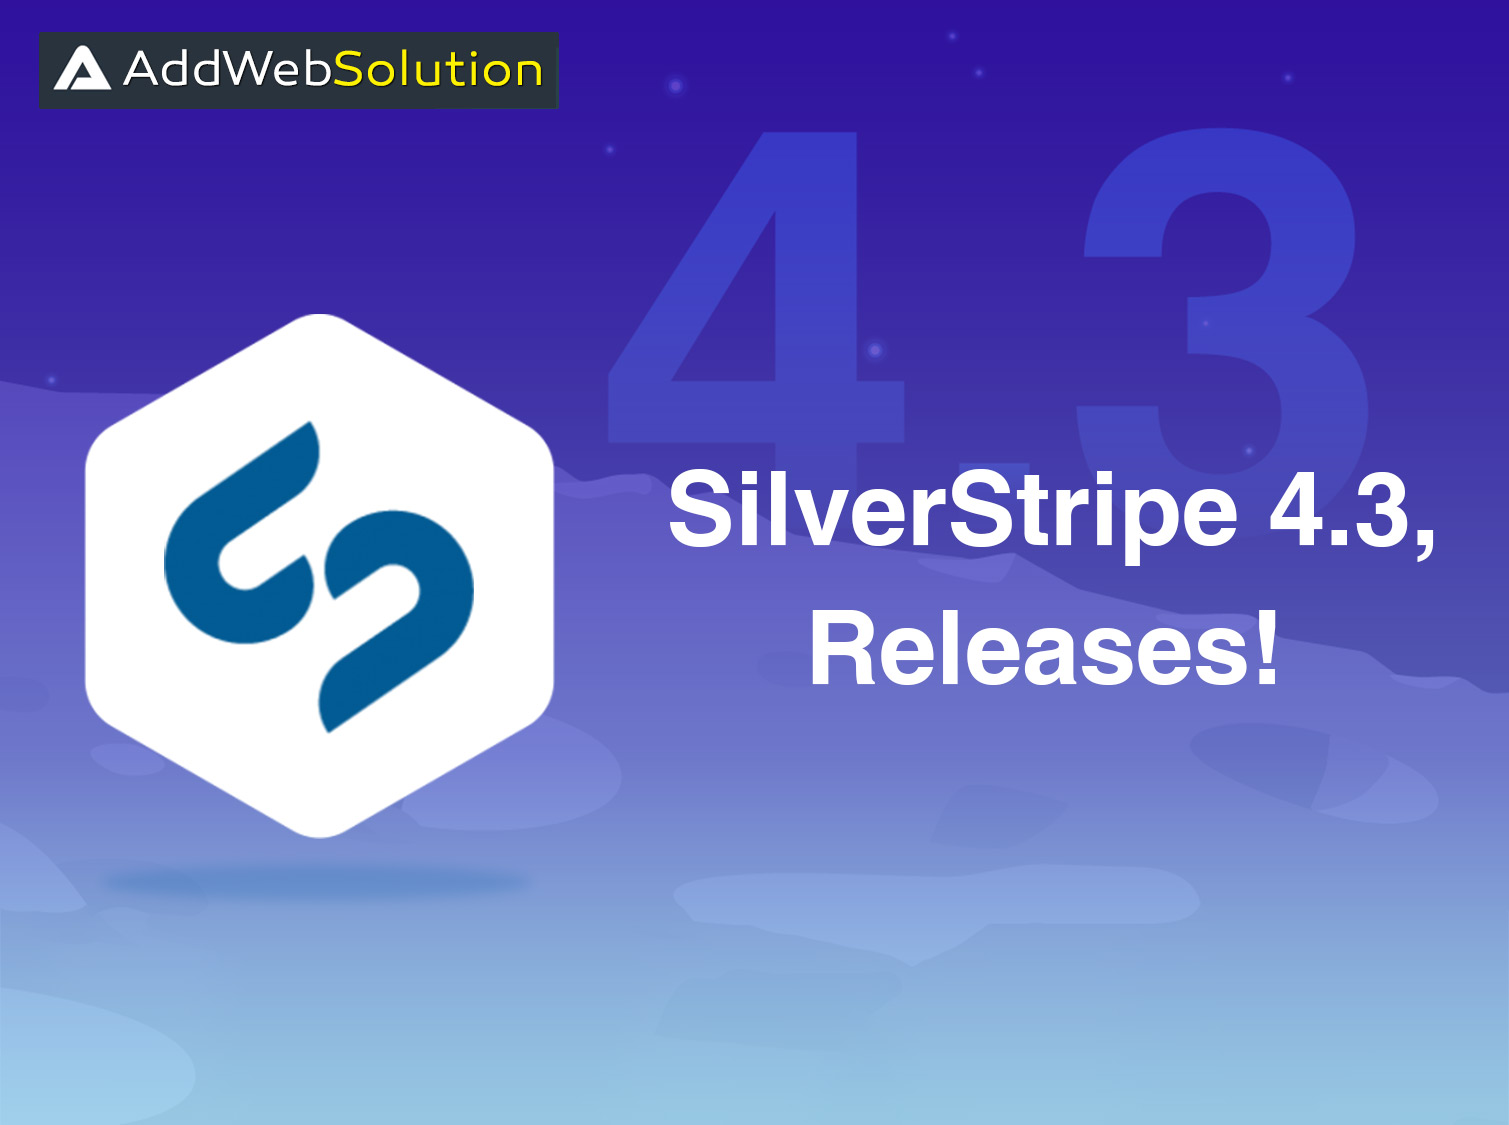 SilverStripe 4.3 Released: Let’s Explore the Updates